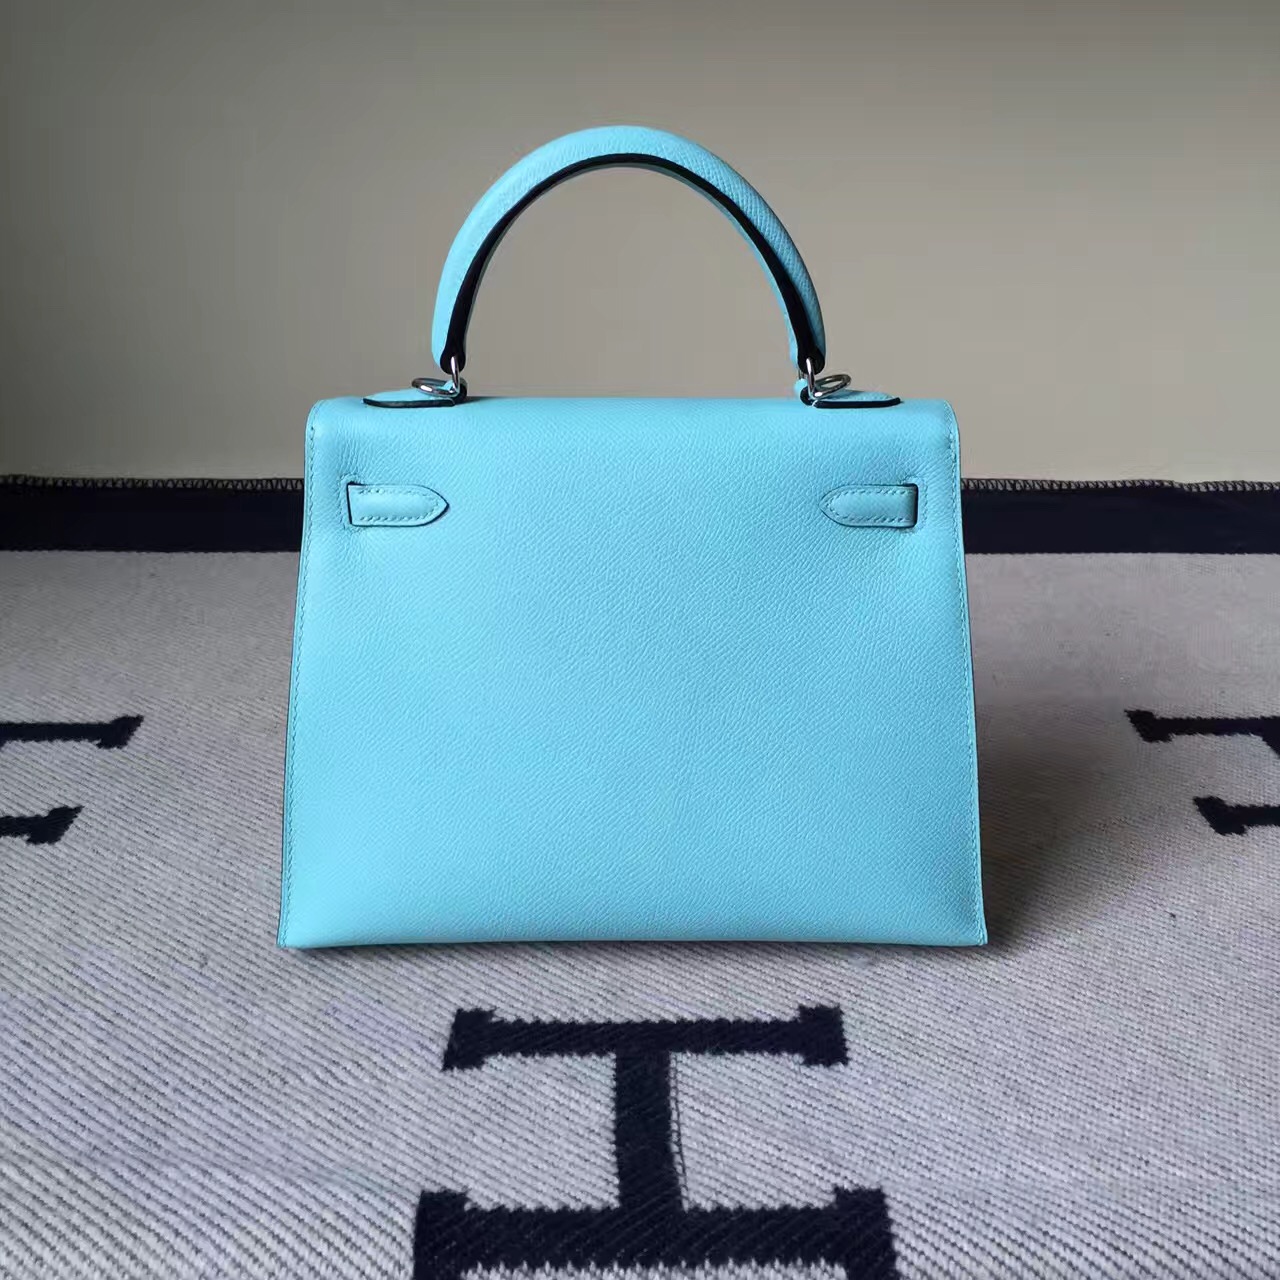 On Sale Hermes Epsom Leather Sellier Kelly Bag25CM in 3P Blue Attol